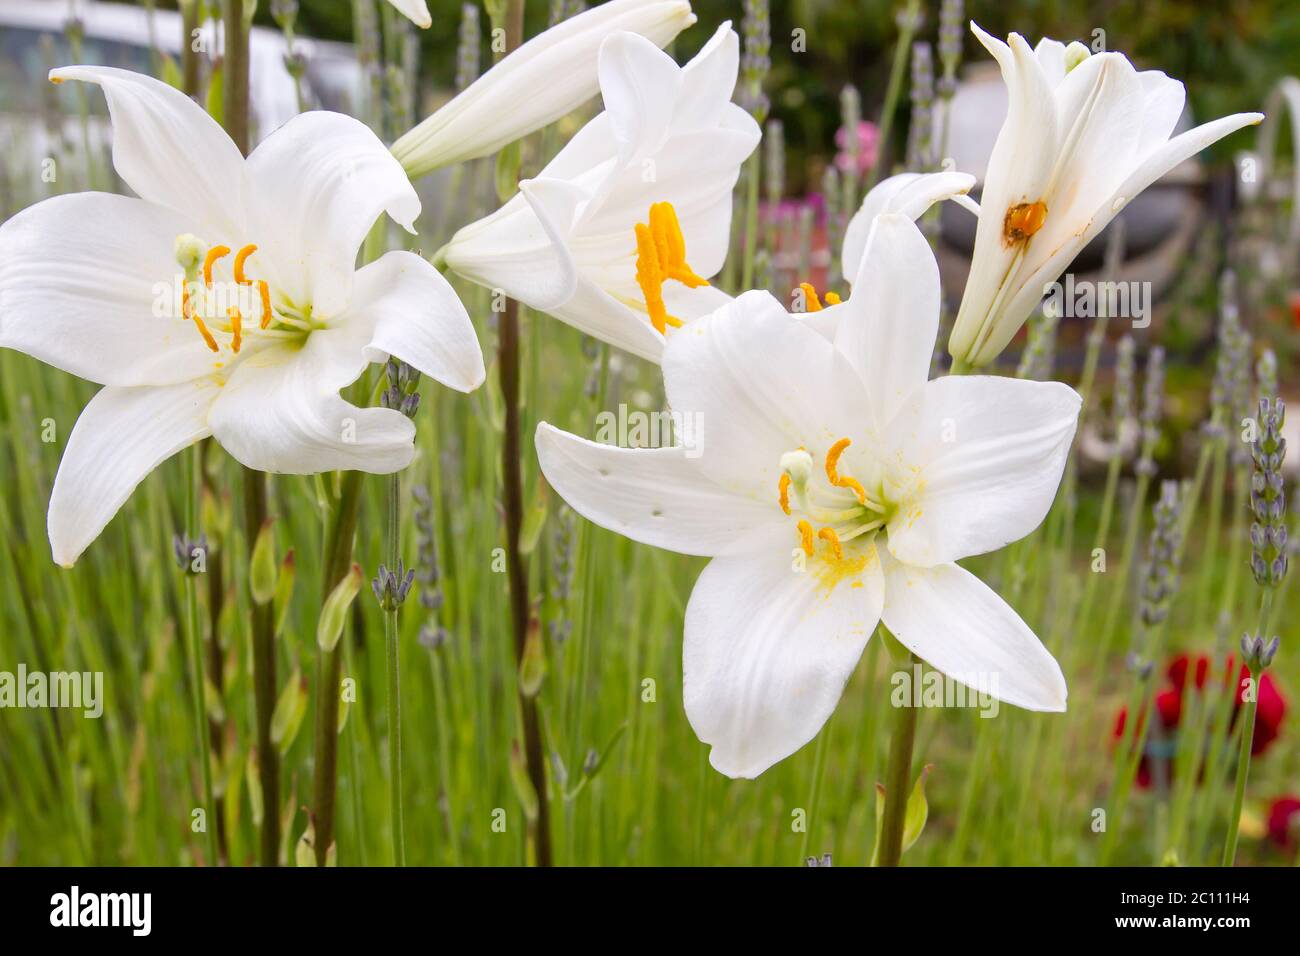 Madonna lily white flowers Stock Photo